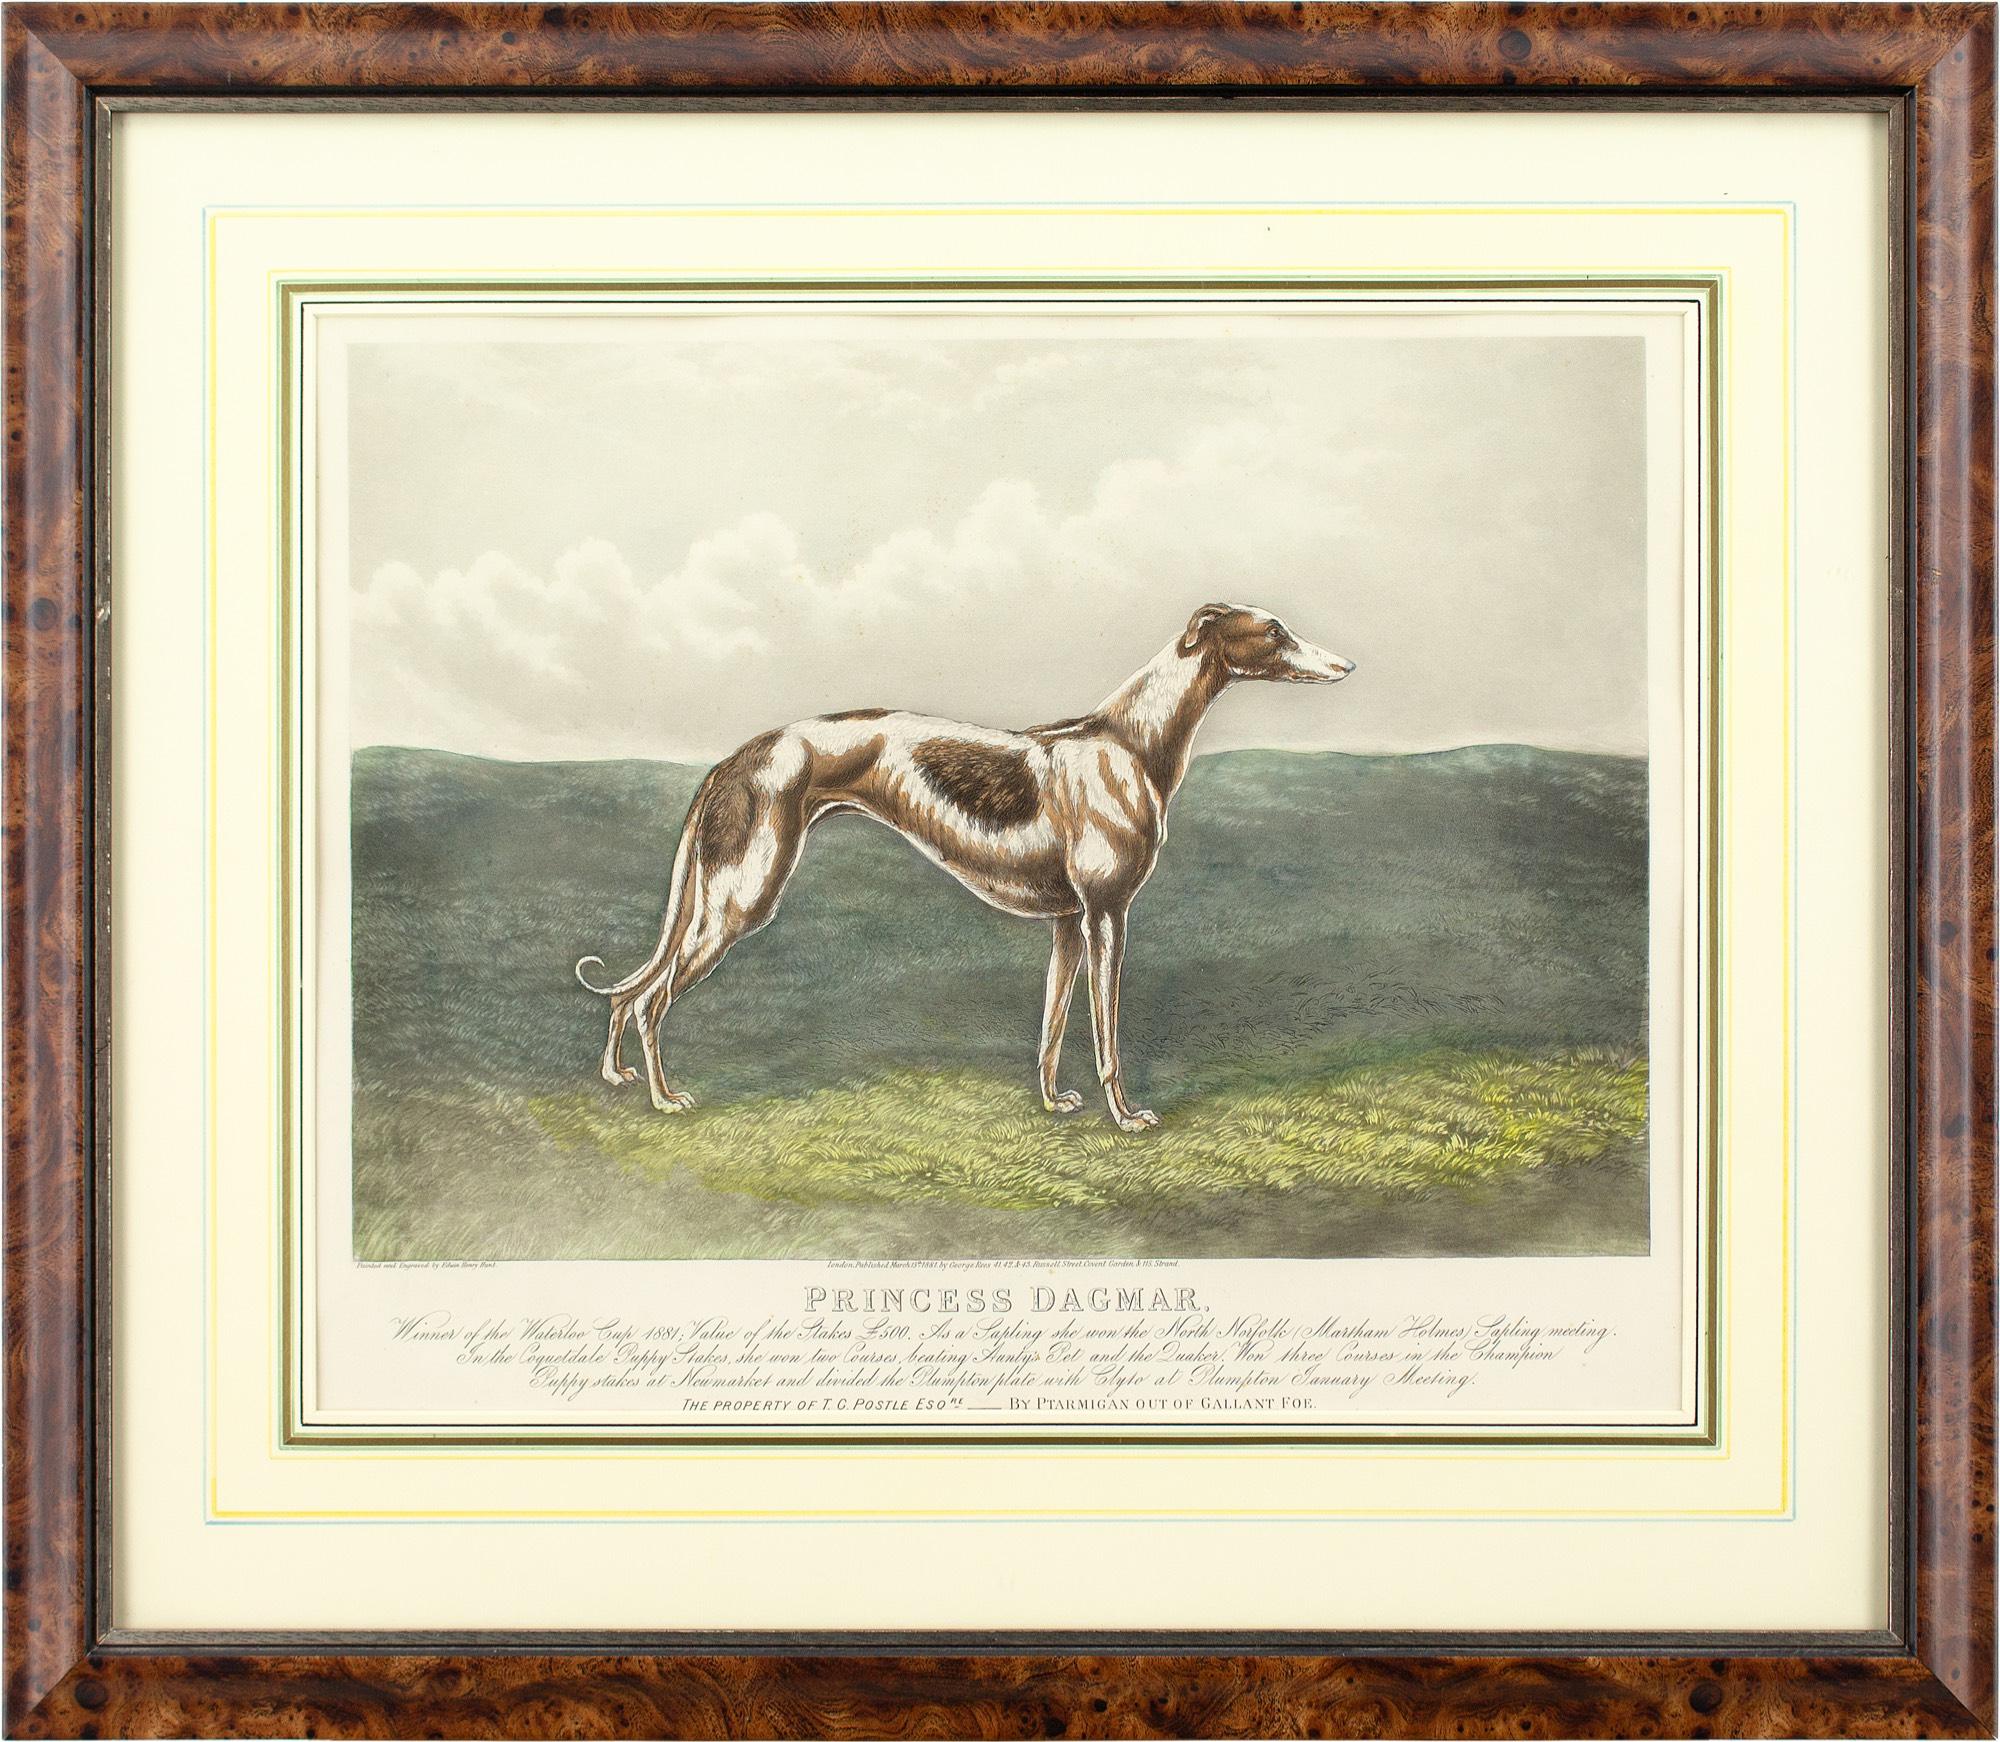 This late 19th-century hand-coloured engraving by British artist Edwin Henry Hunt (1840-1925) depicts the racing greyhound Princess Dagmar.

Victorians relished the exhilaration of greyhound racing and flocked to numerous events. Notable winners